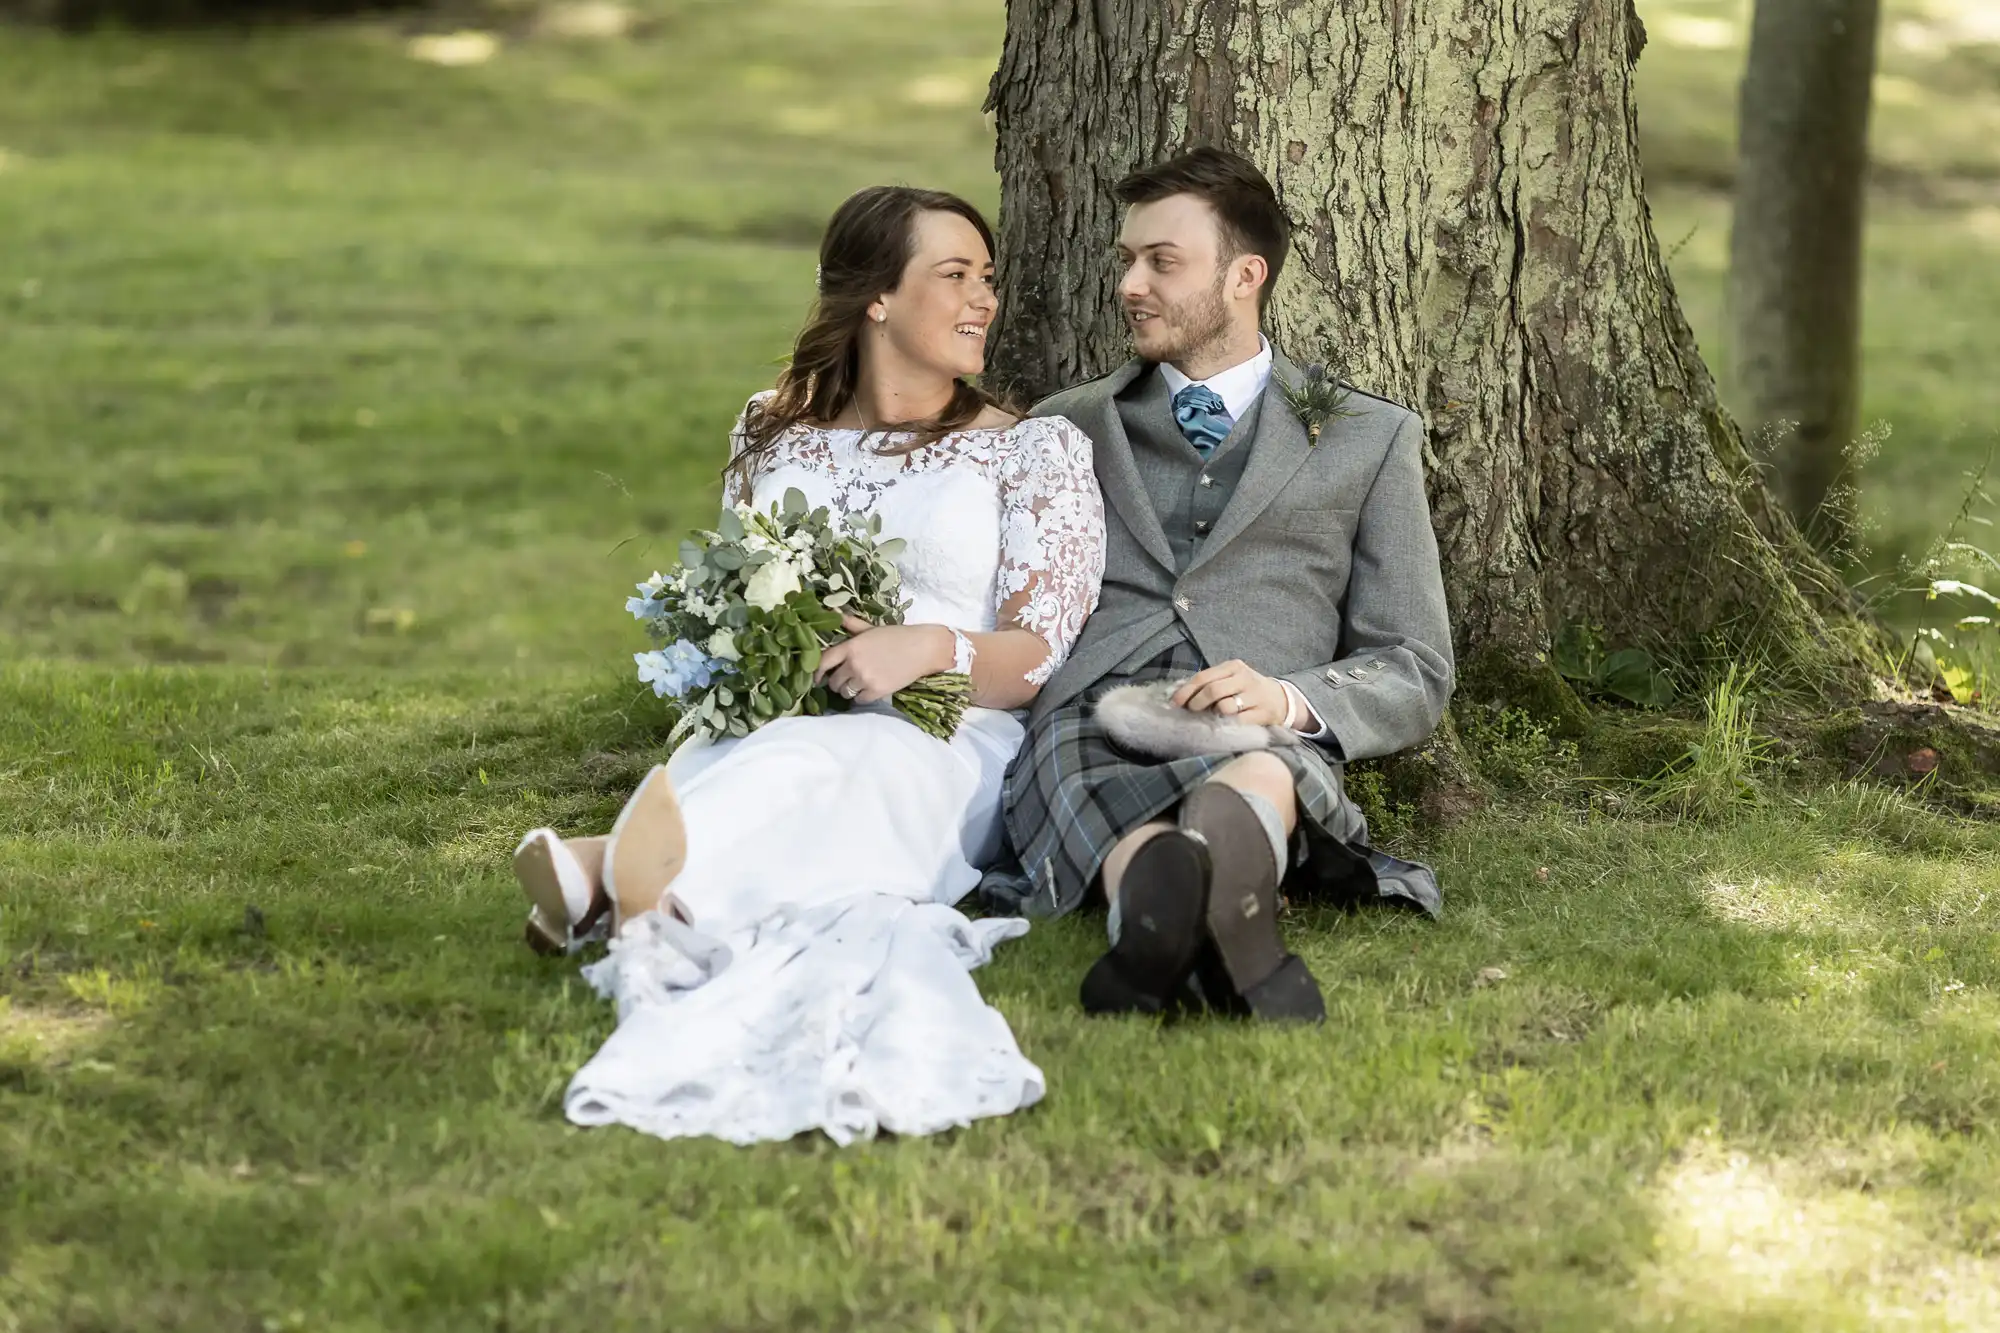 A couple in wedding attire sits under a tree, smiling at each other, the man in a kilt and the woman holding a bouquet.